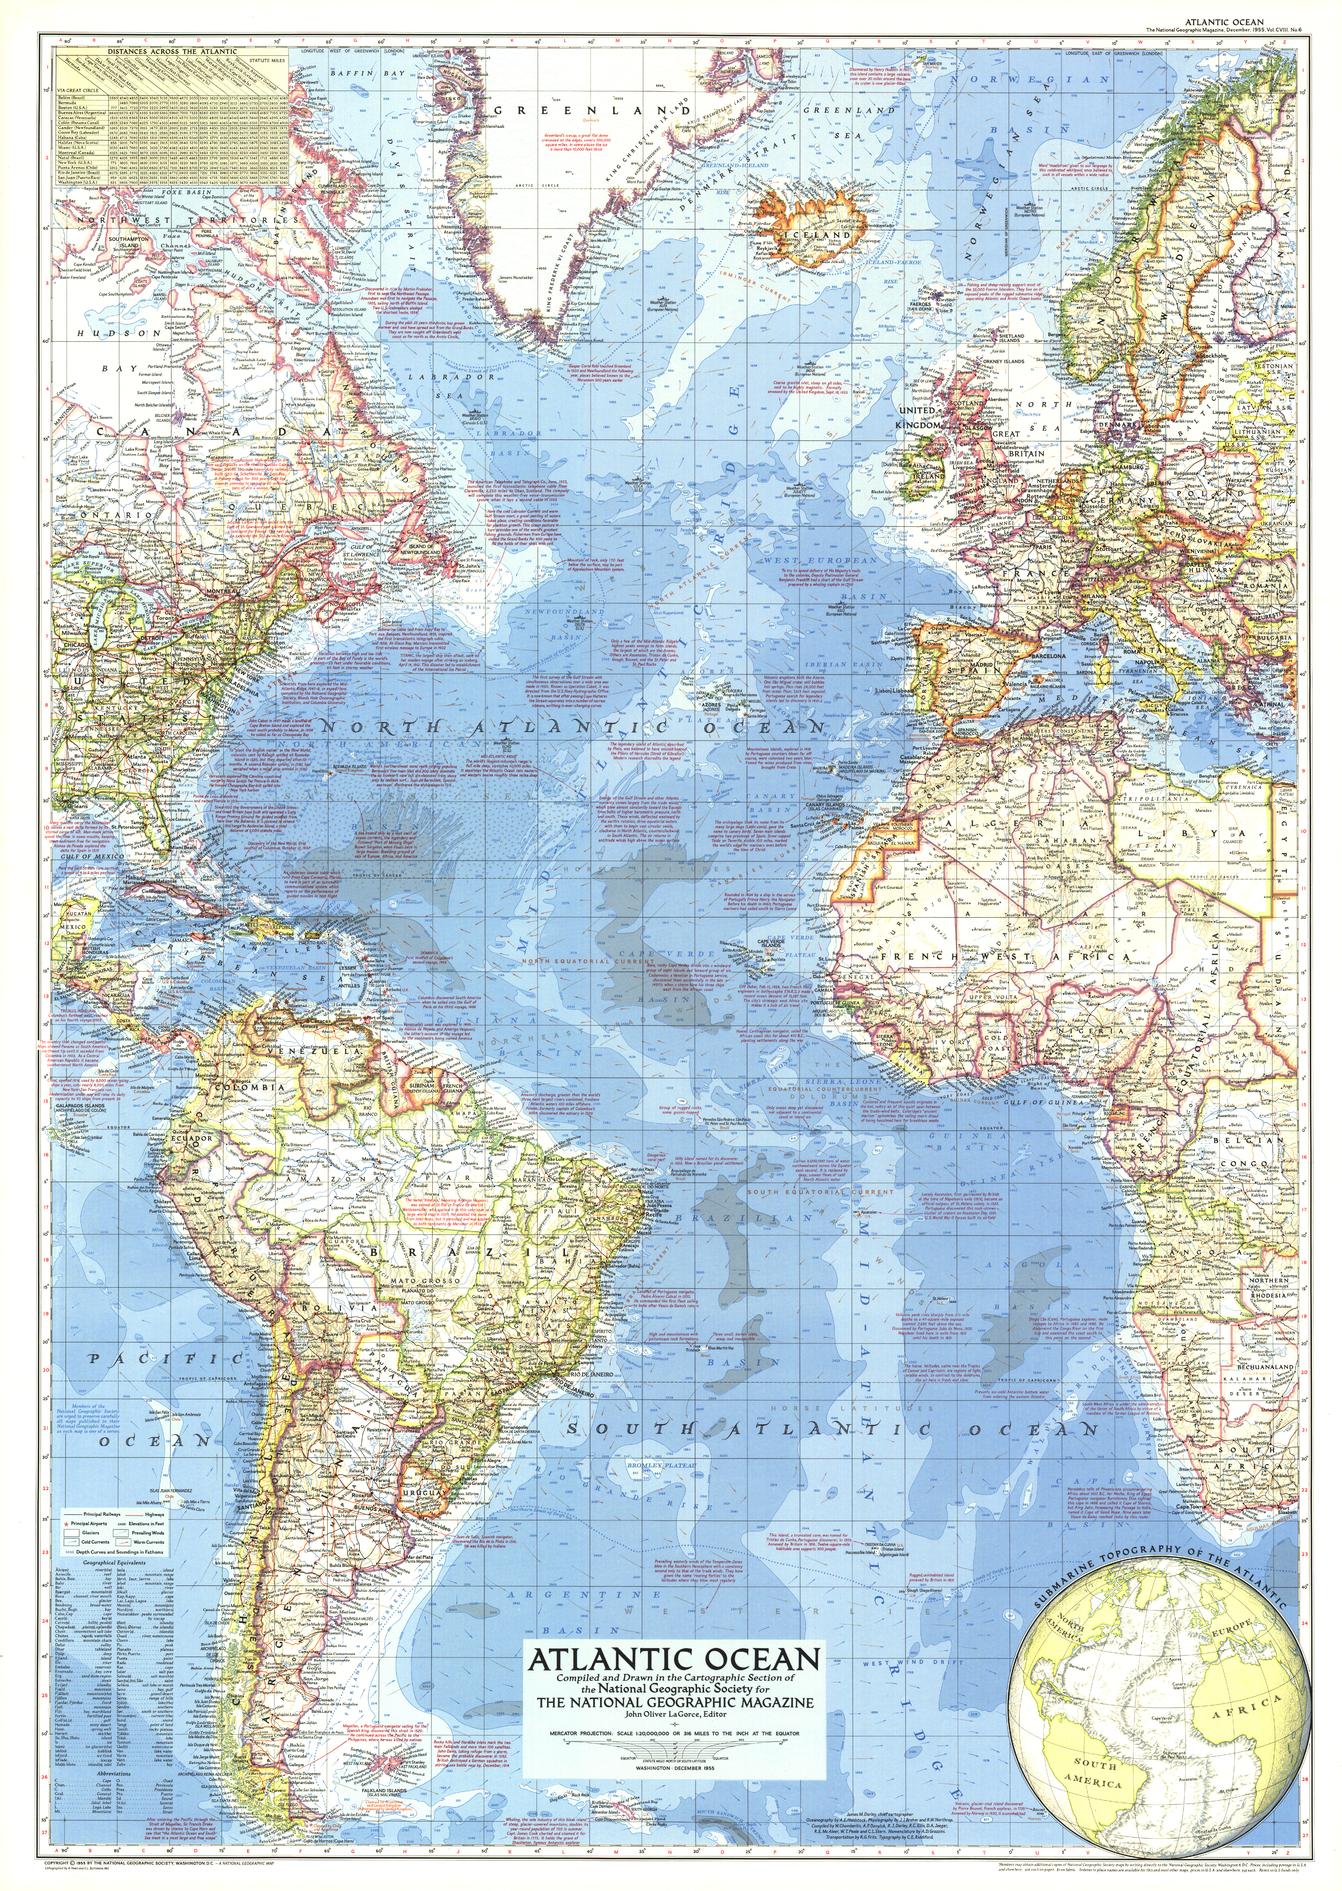 Atlantic Ocean Map - Published 1955, National Geographic Maps